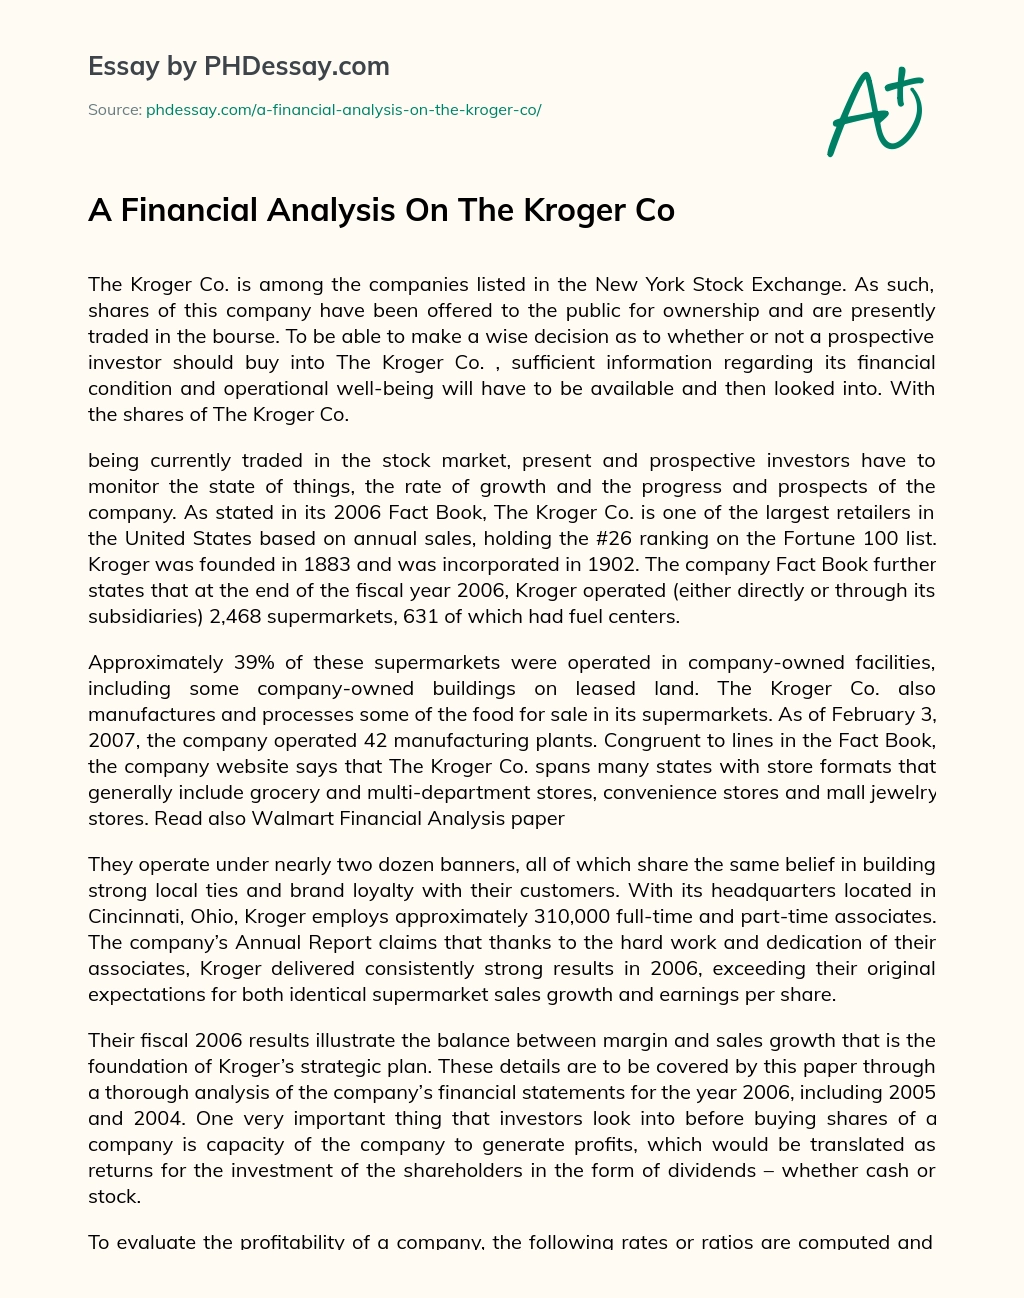 A Financial Analysis On The Kroger Co essay